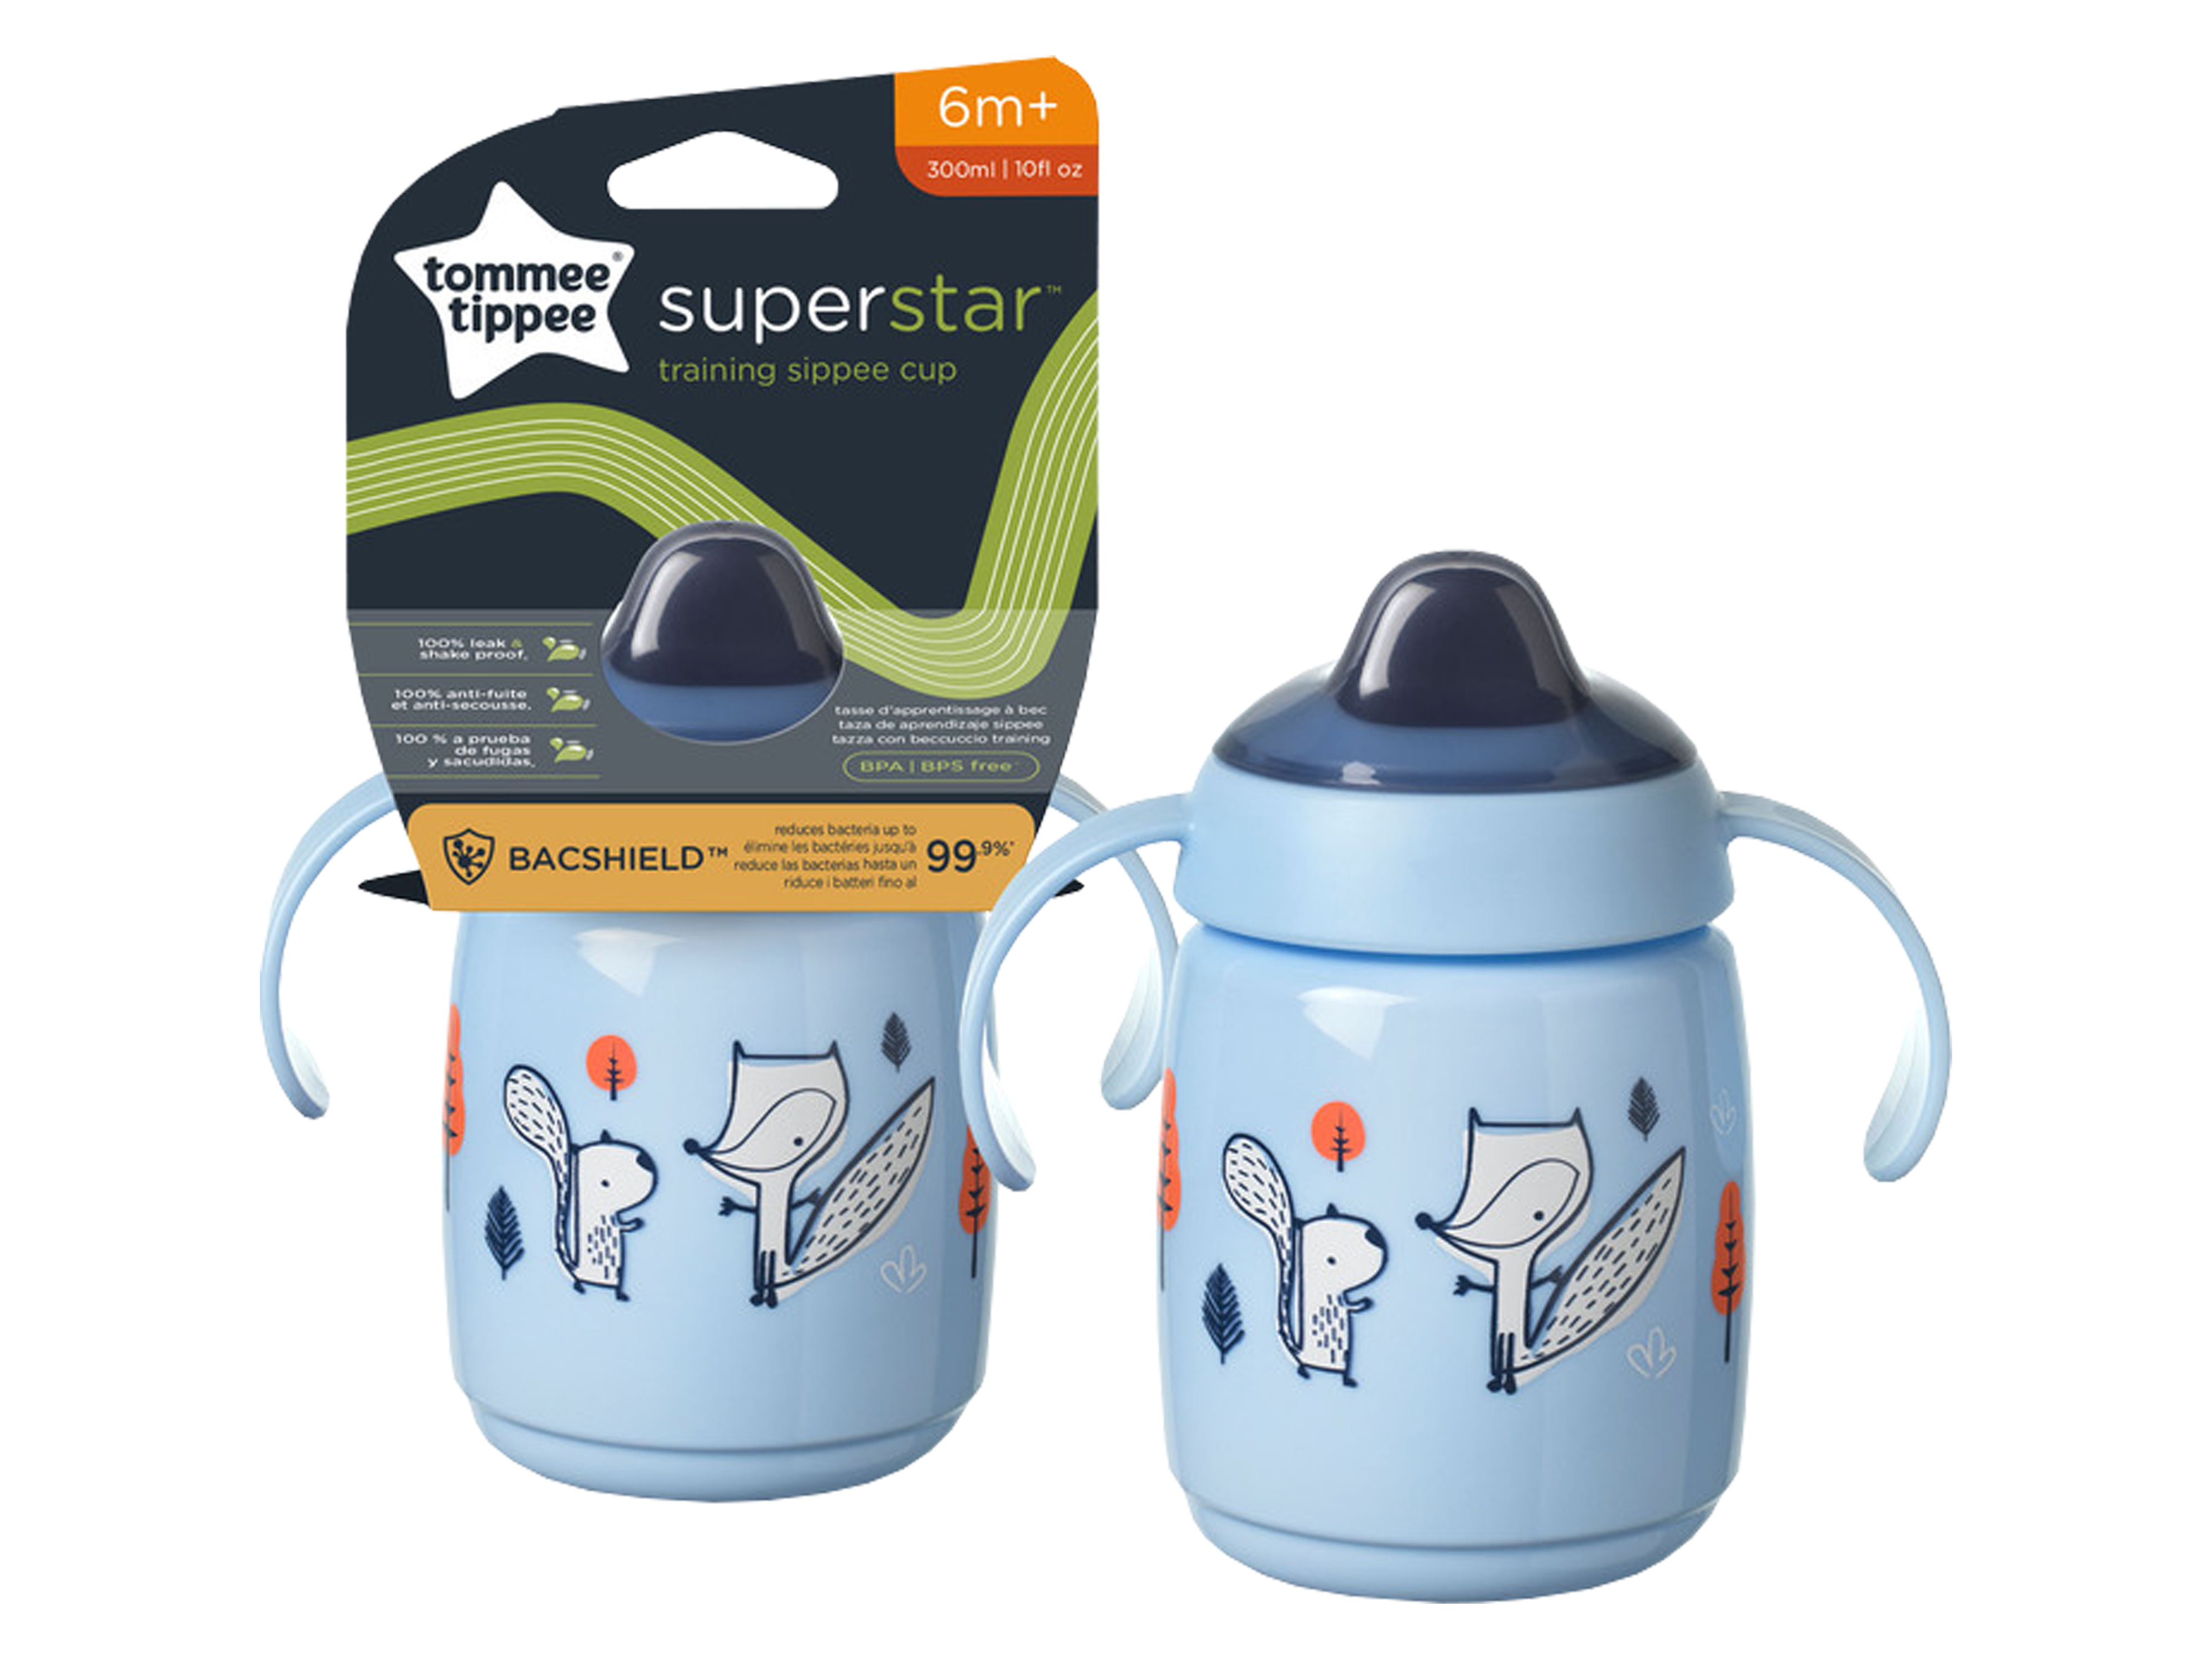 Tommee Tippee Superstar Sippee Cup 6md+, Blå, 1 stk.